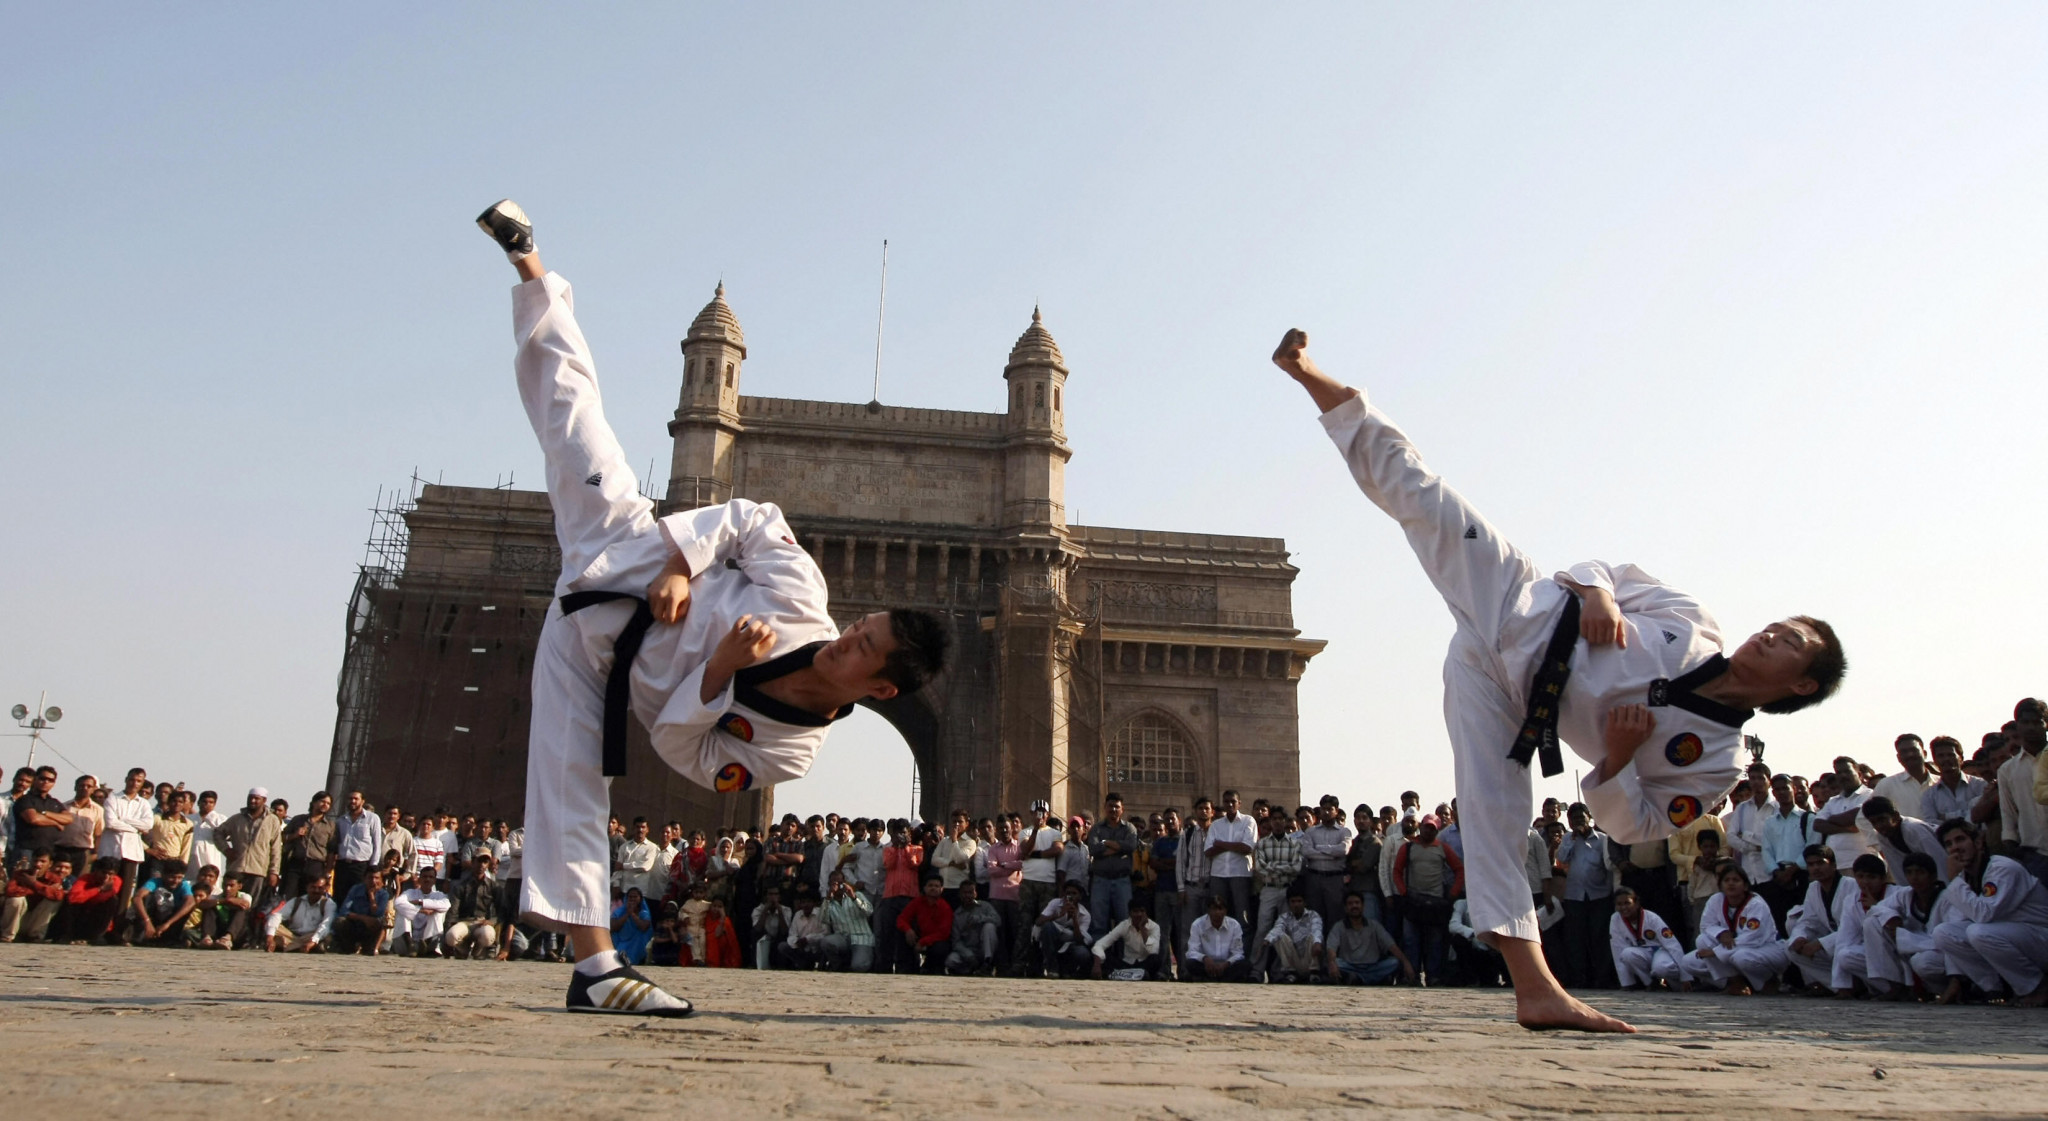 India is to host a national online championship in poomsae taekwondo ©Getty Images